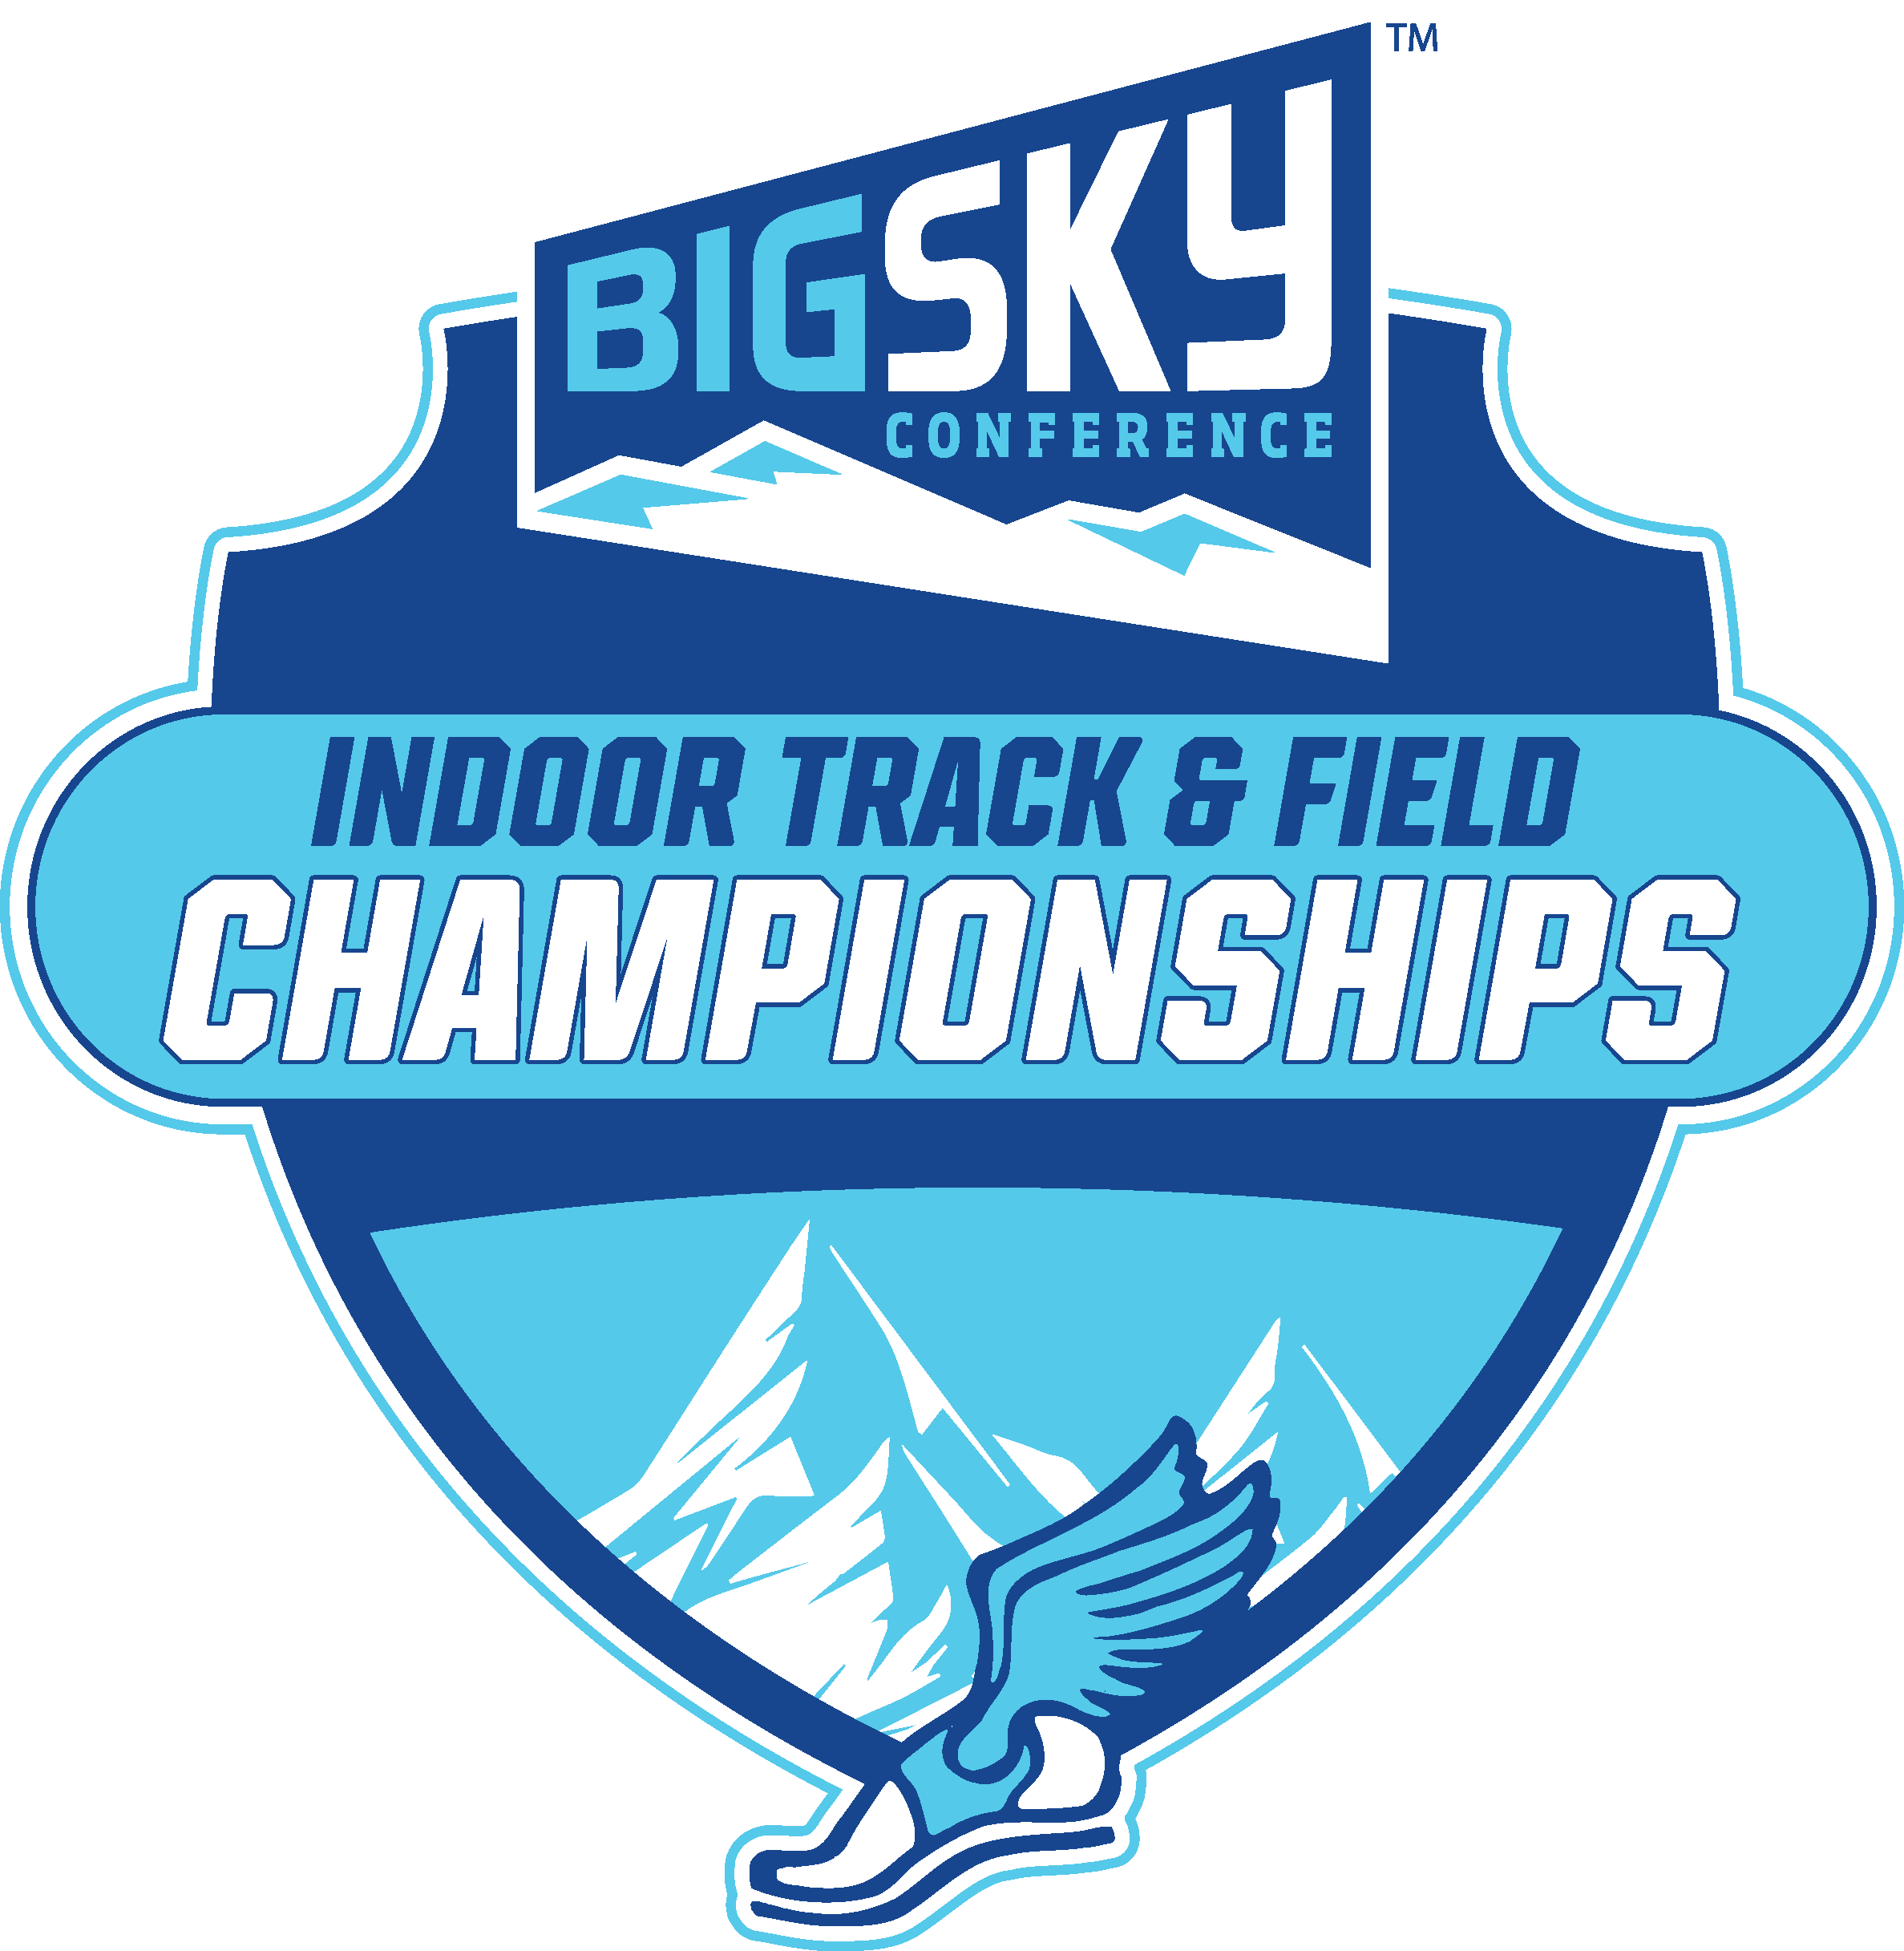 Big Sky Conference Indoor Track & Field Championships SelectHospitality